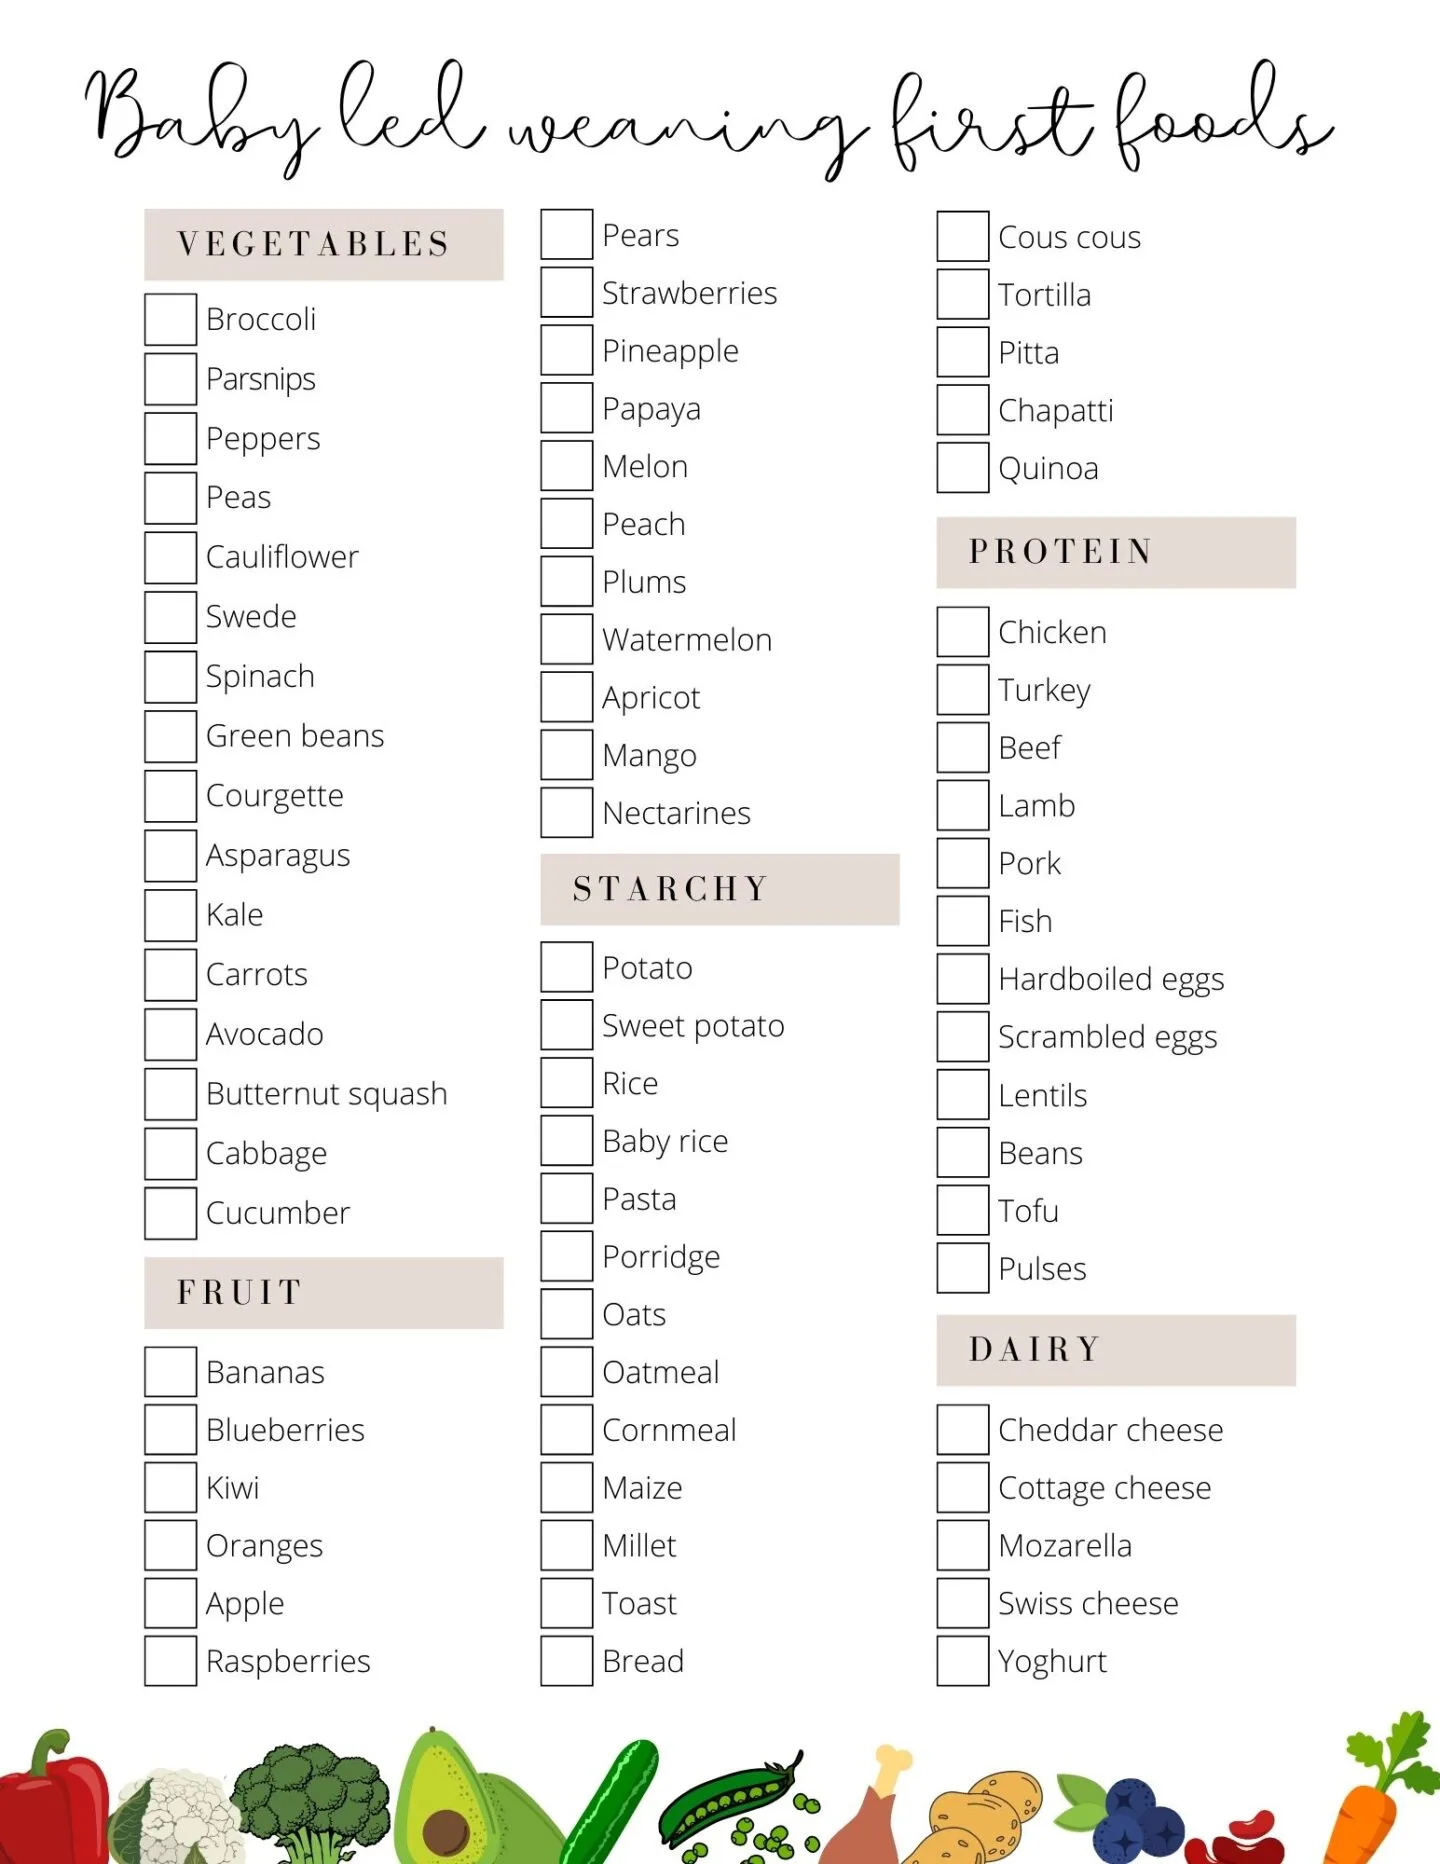 100 first foods checklist for baby led weaning